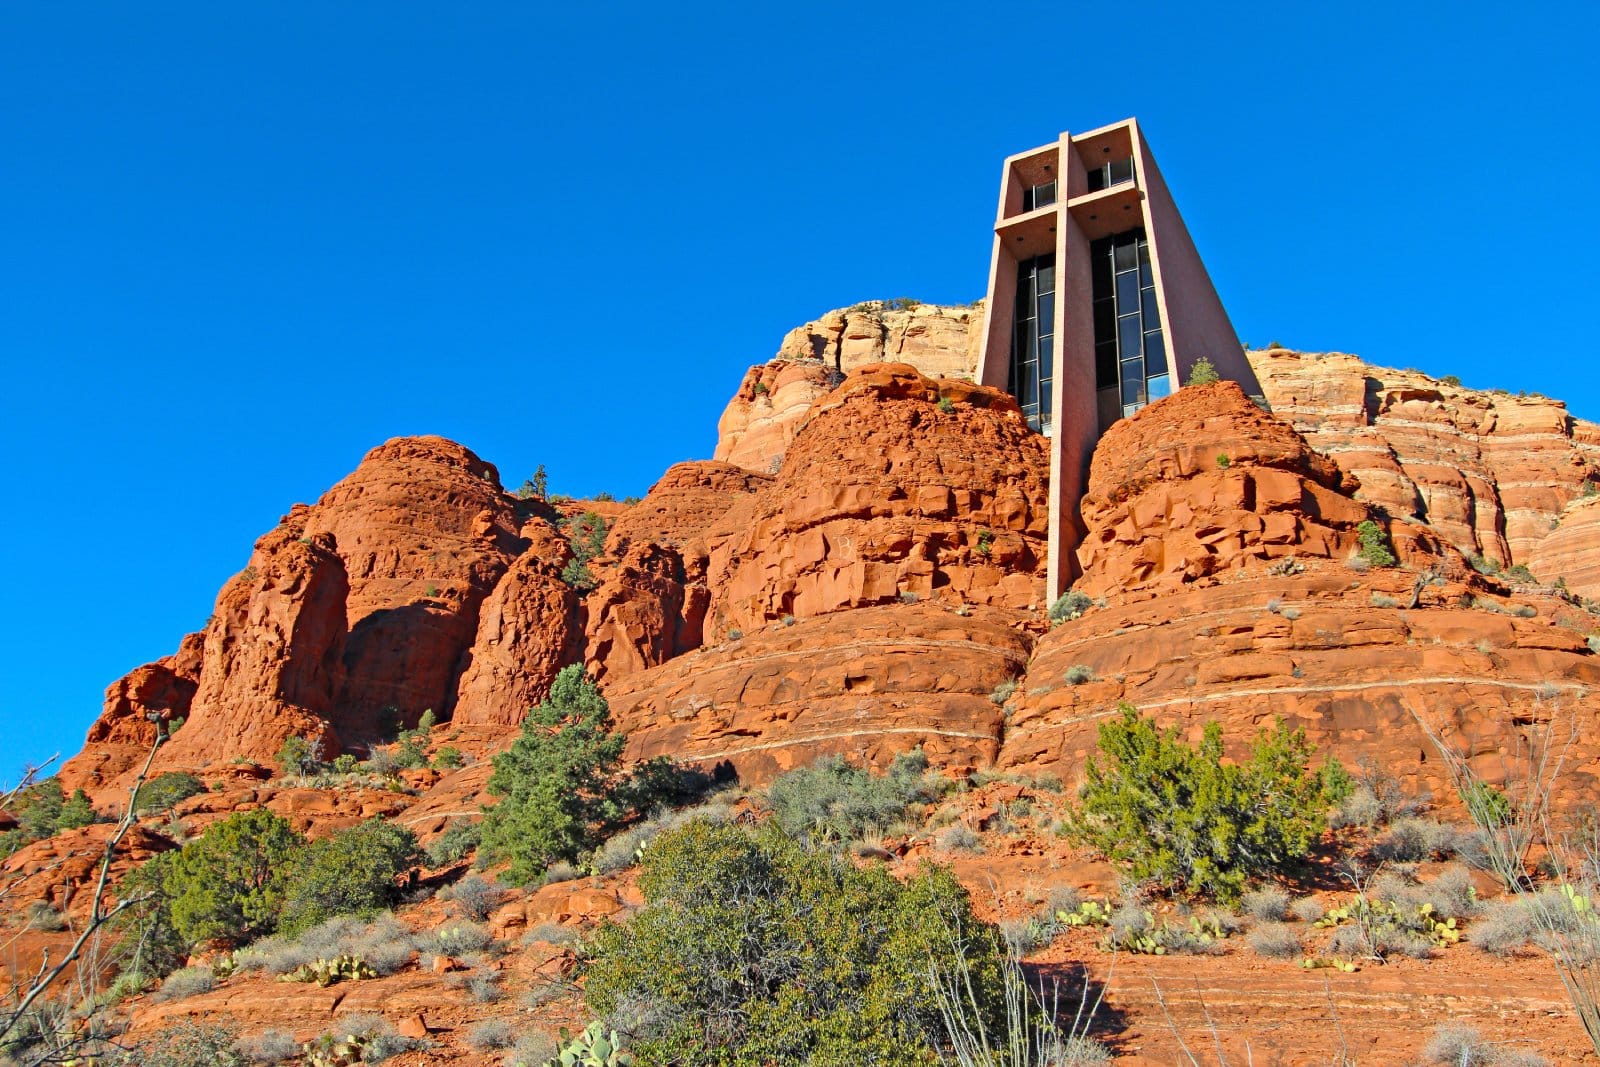 Image Credit: Shutterstock / cpaulfell <p><span>Sedona’s red rocks provide a dramatic backdrop for this chapel, which is built into the mountainside, offering breathtaking views and a peaceful space for meditation and prayer.</span></p>